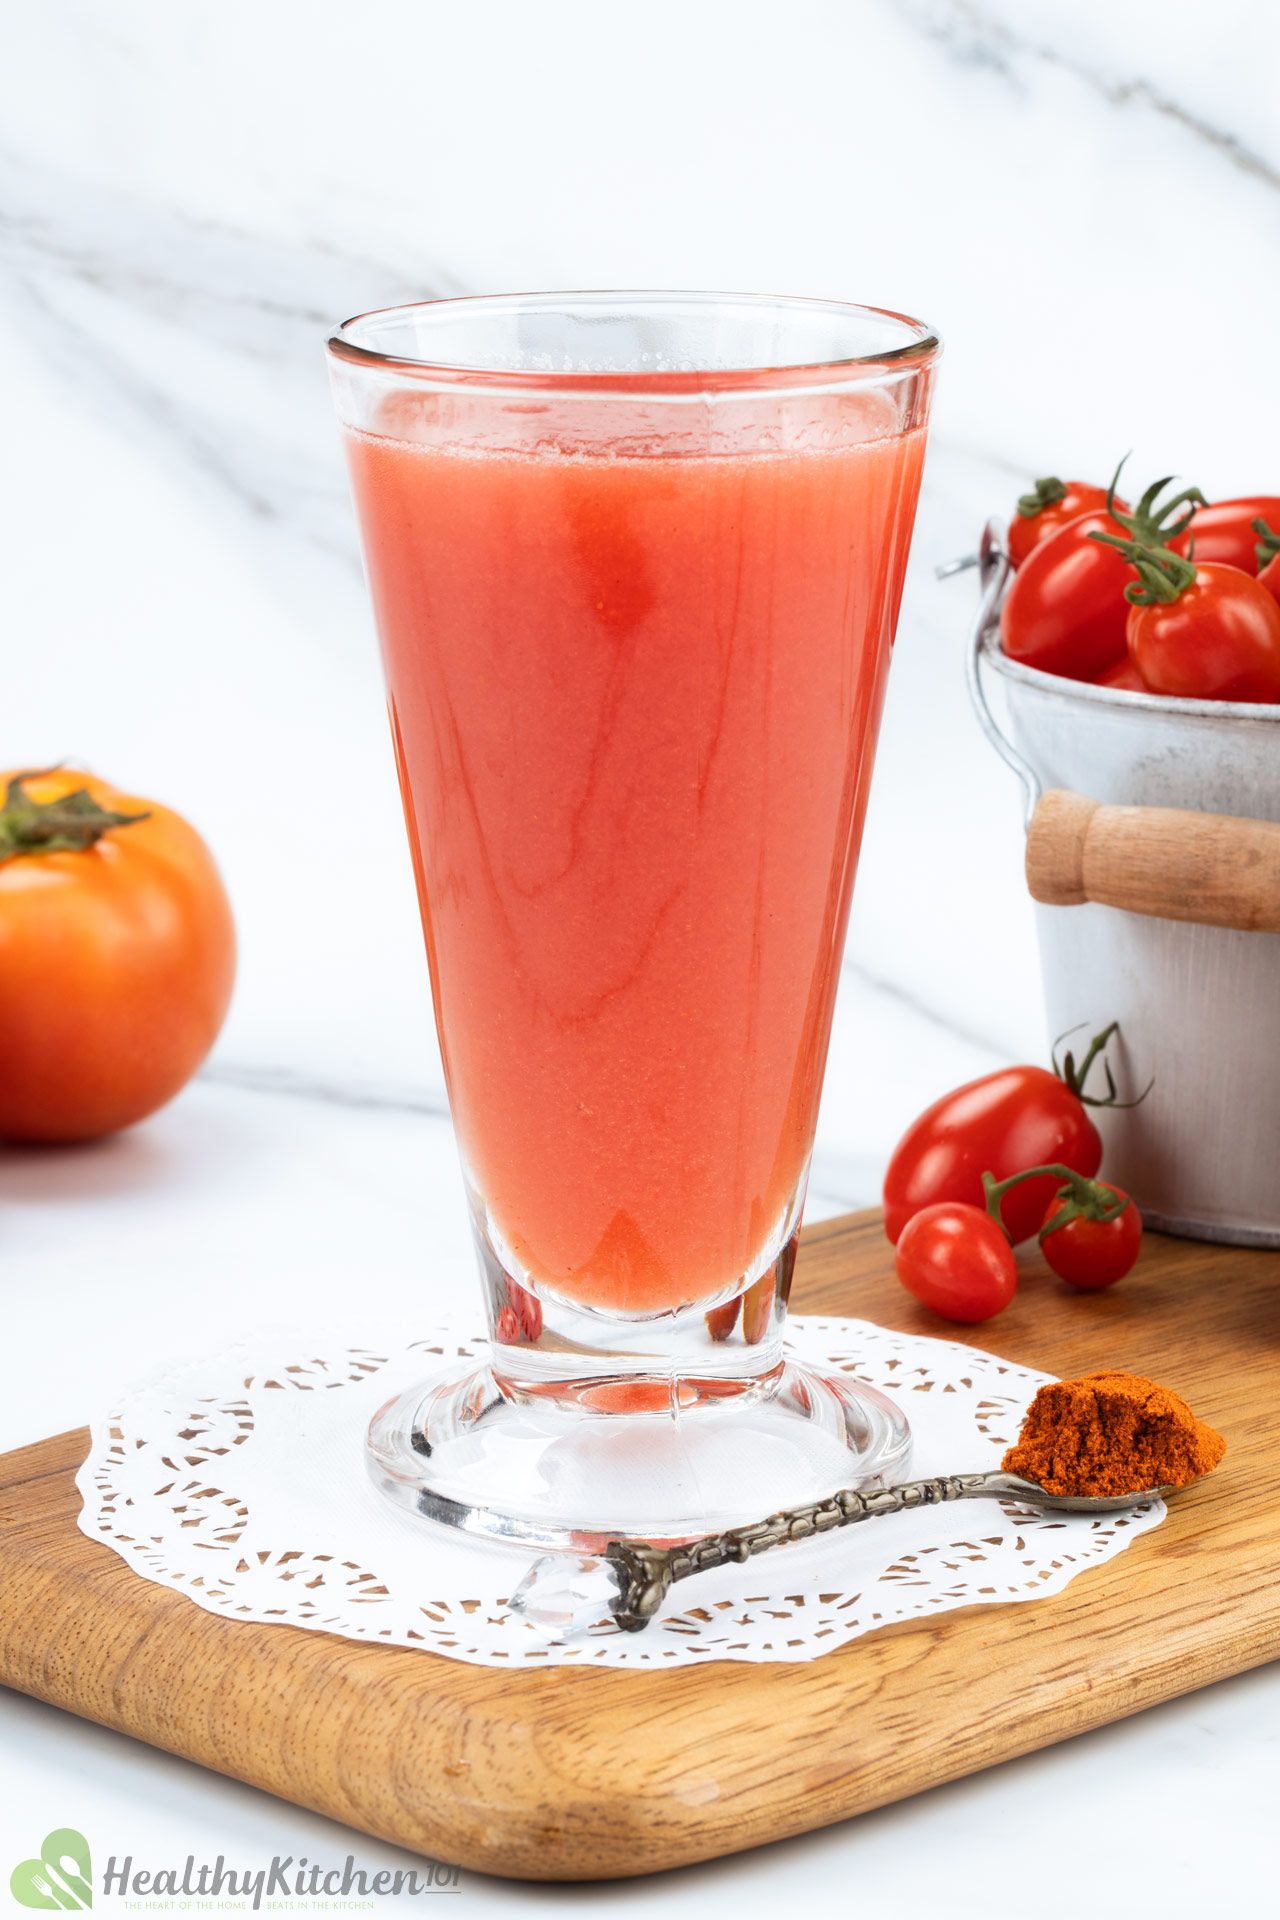 Vodka and Tomato Juice Recipe bloody mary cocktail